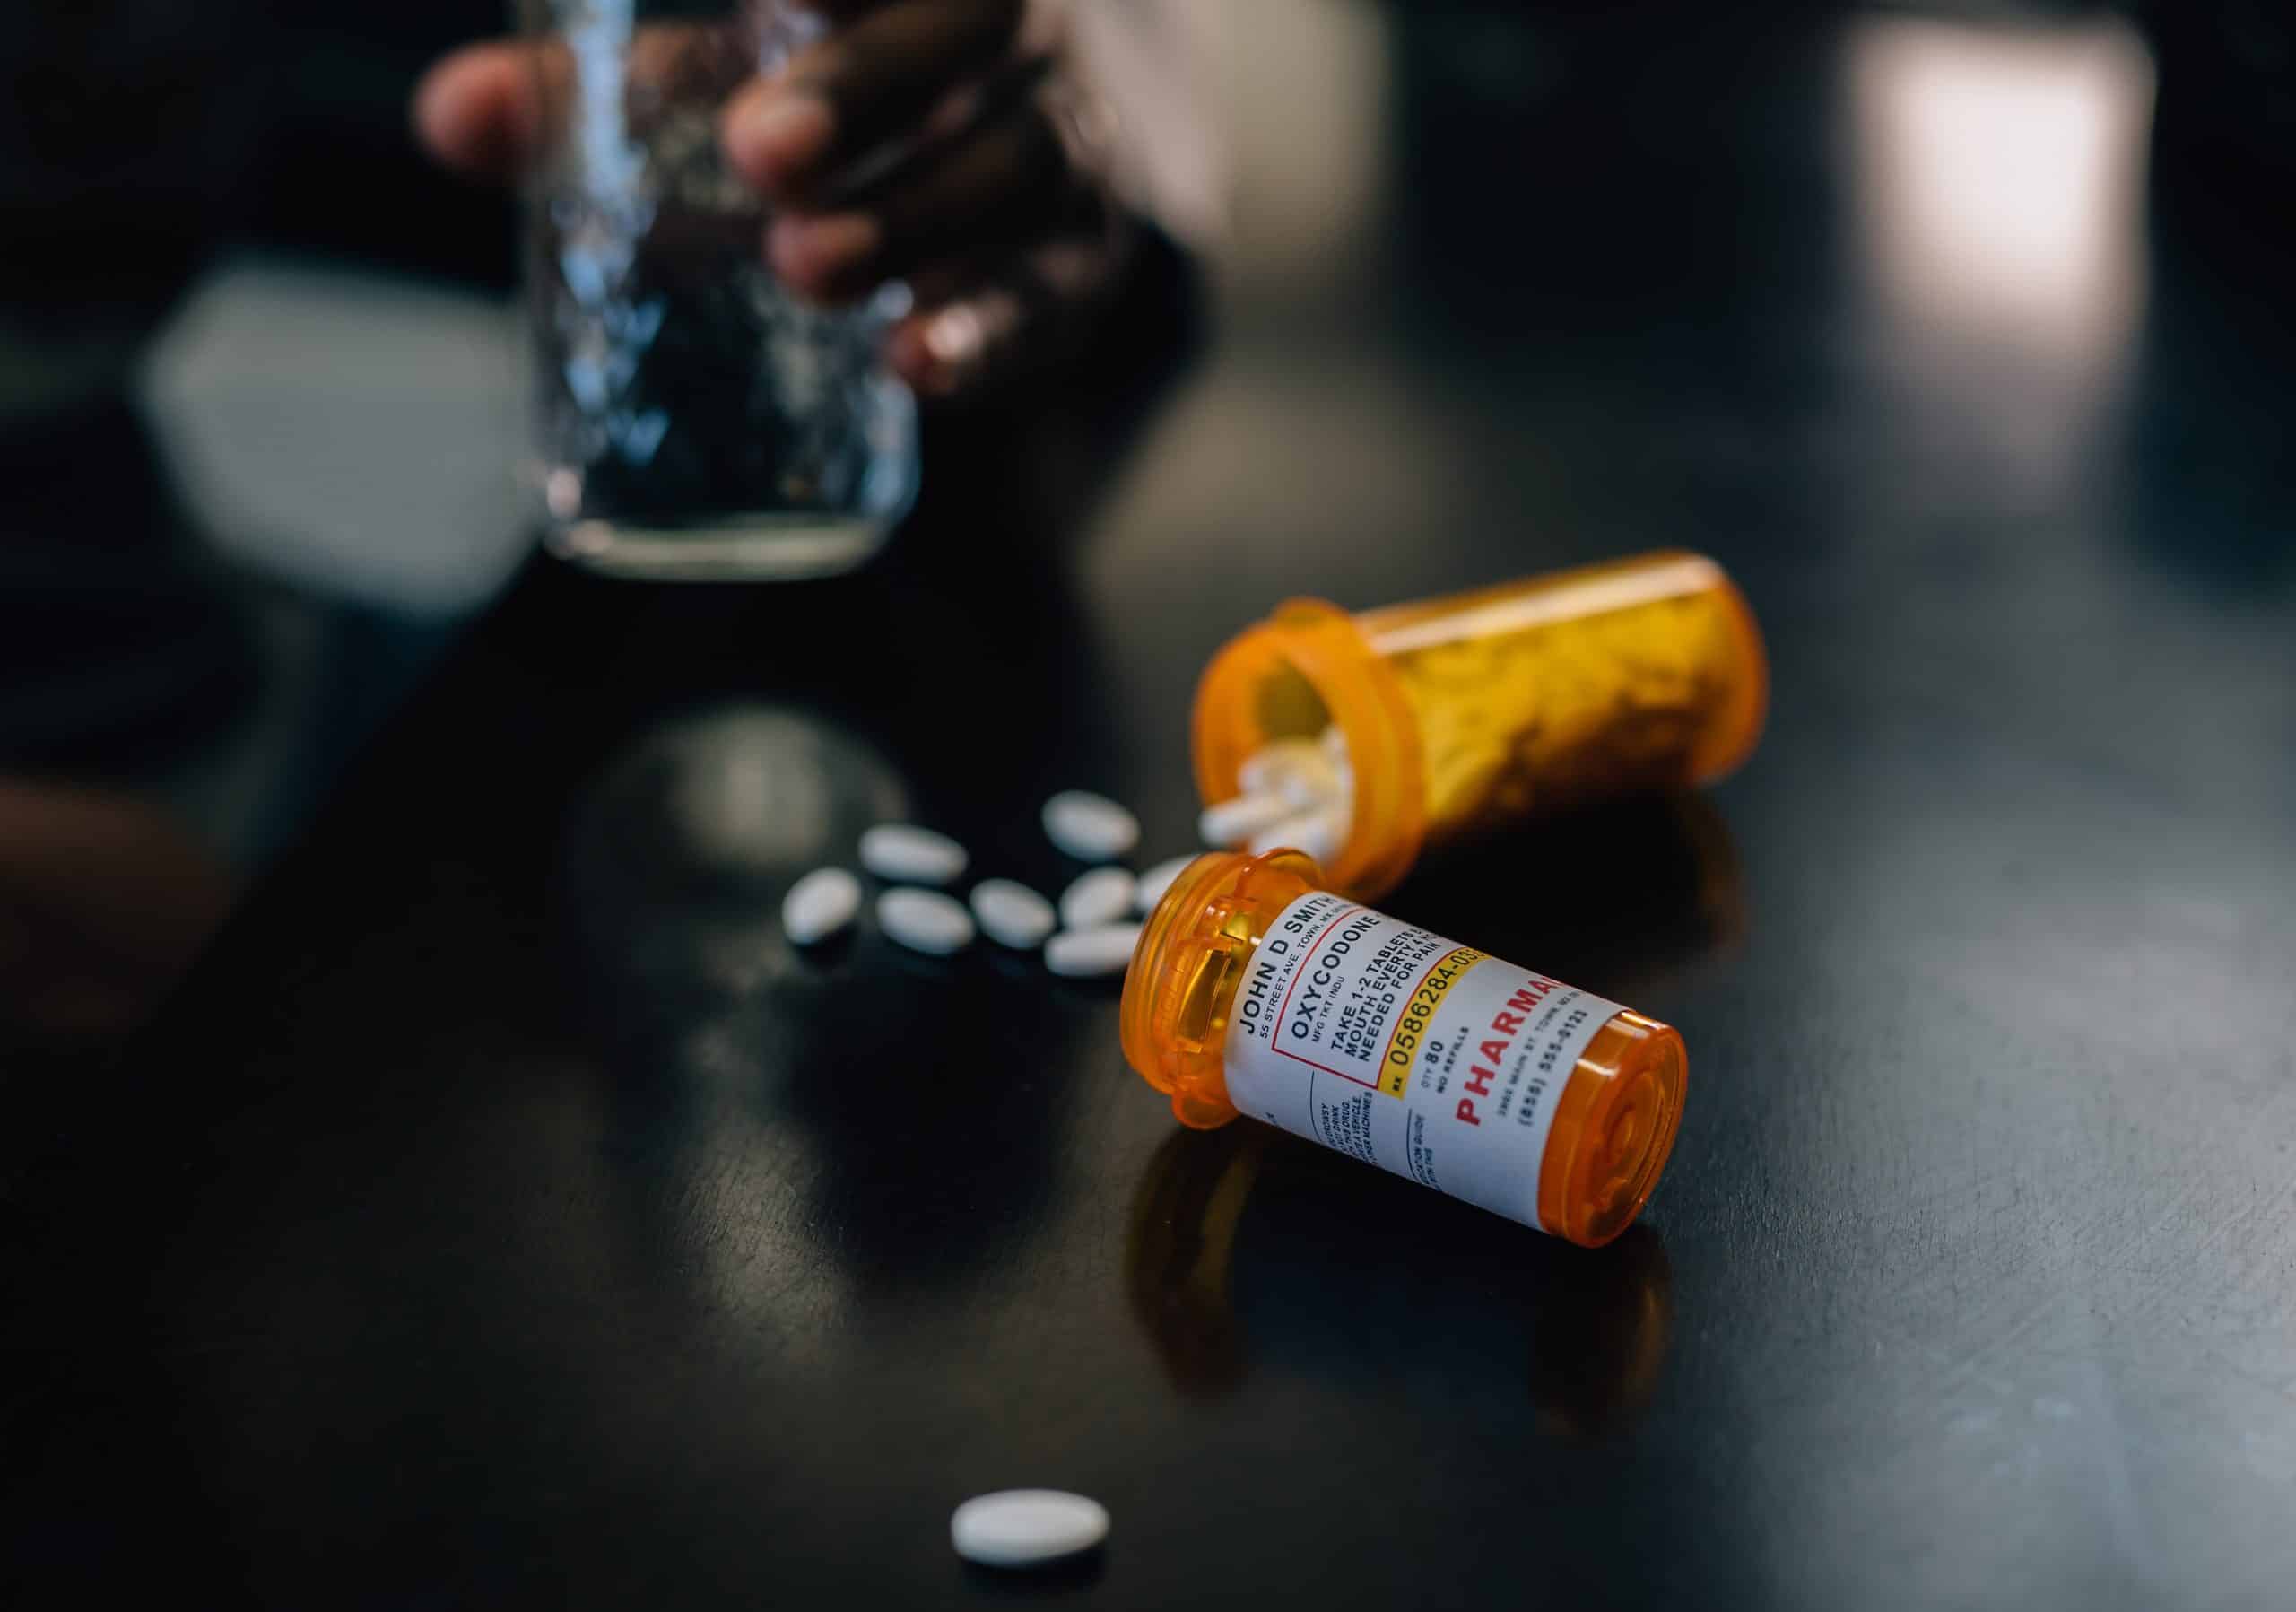 Two prescription oxycodone bottles tipped over in focus, man in need of prescription drug abuse treatment
holding glass of water in the background